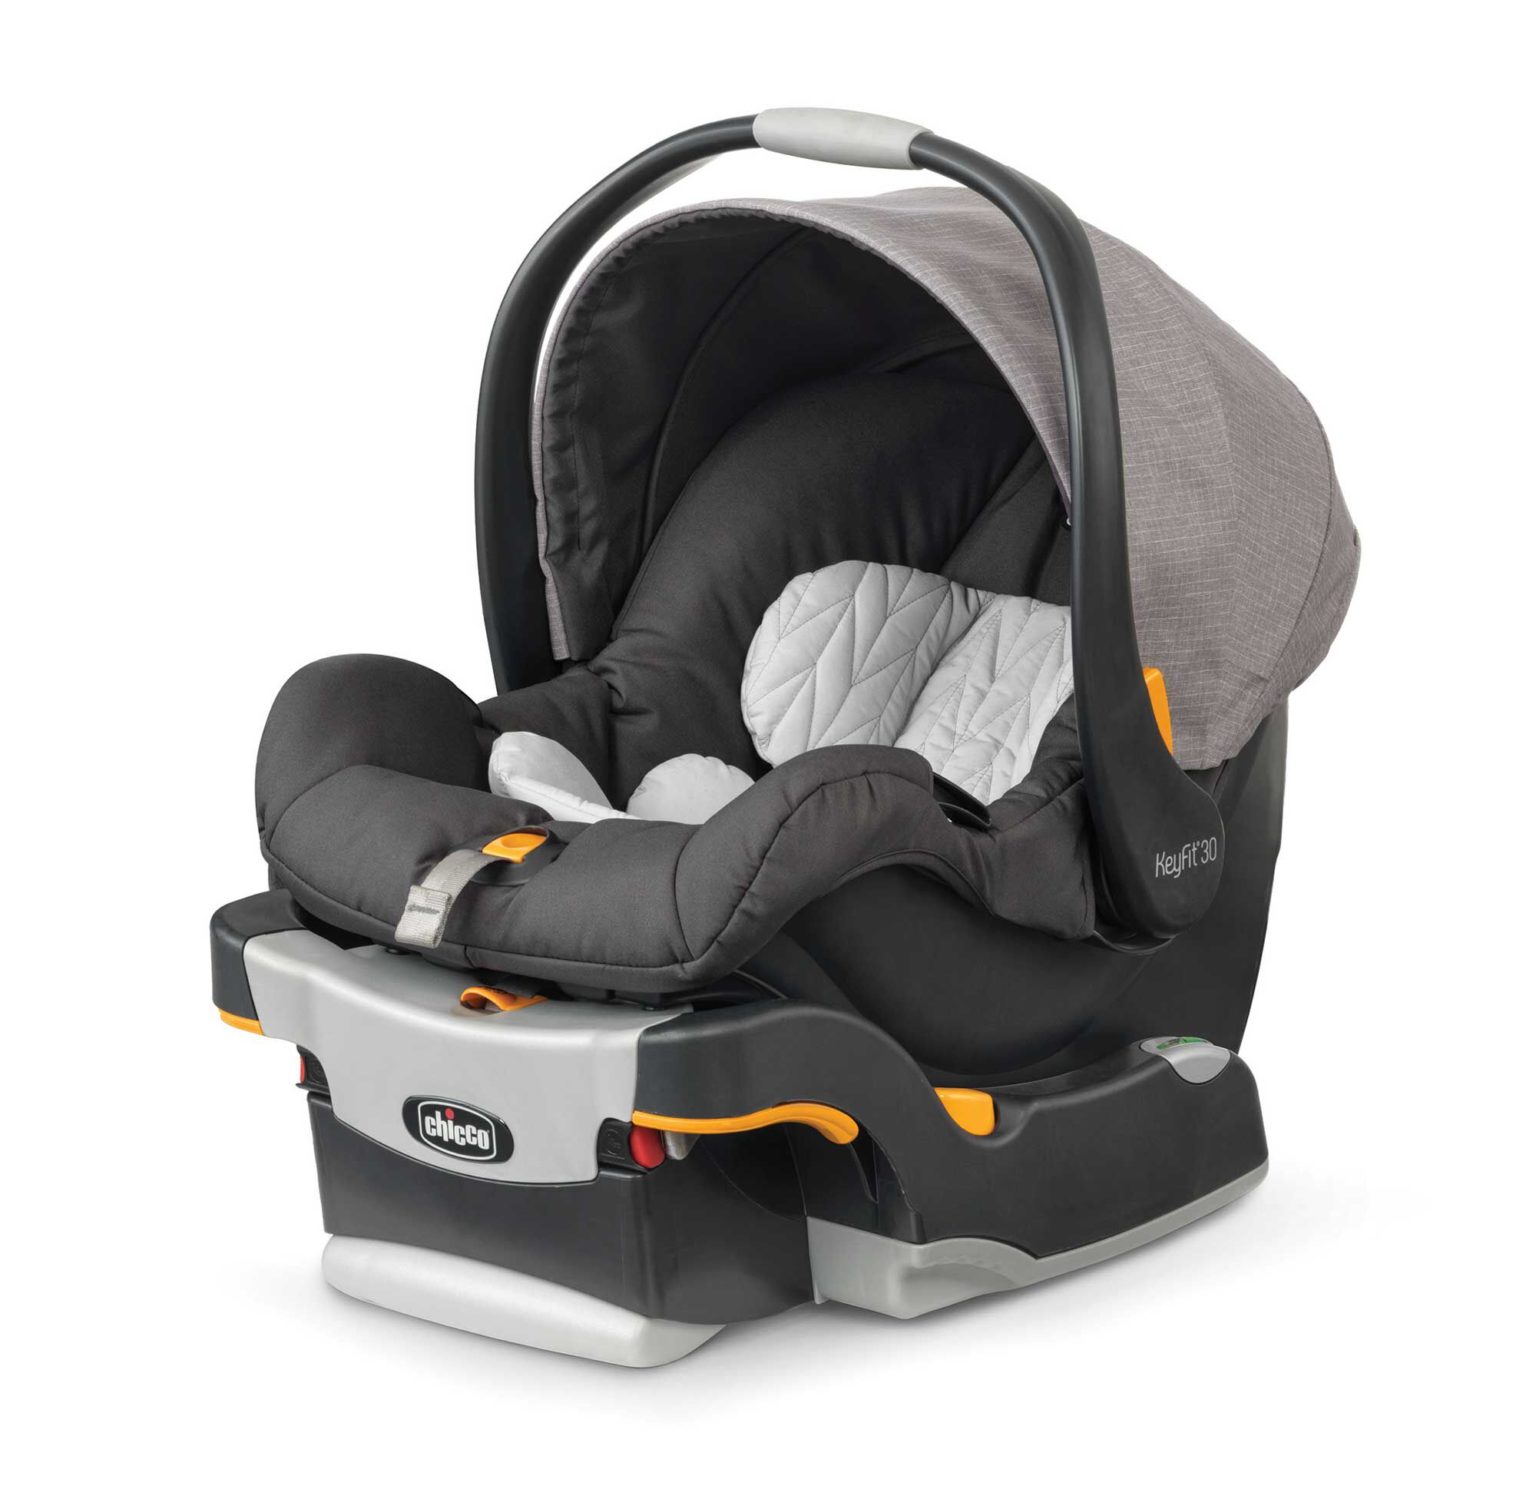 Chicco KeyFit Infant Car Seat: Our Top Pick